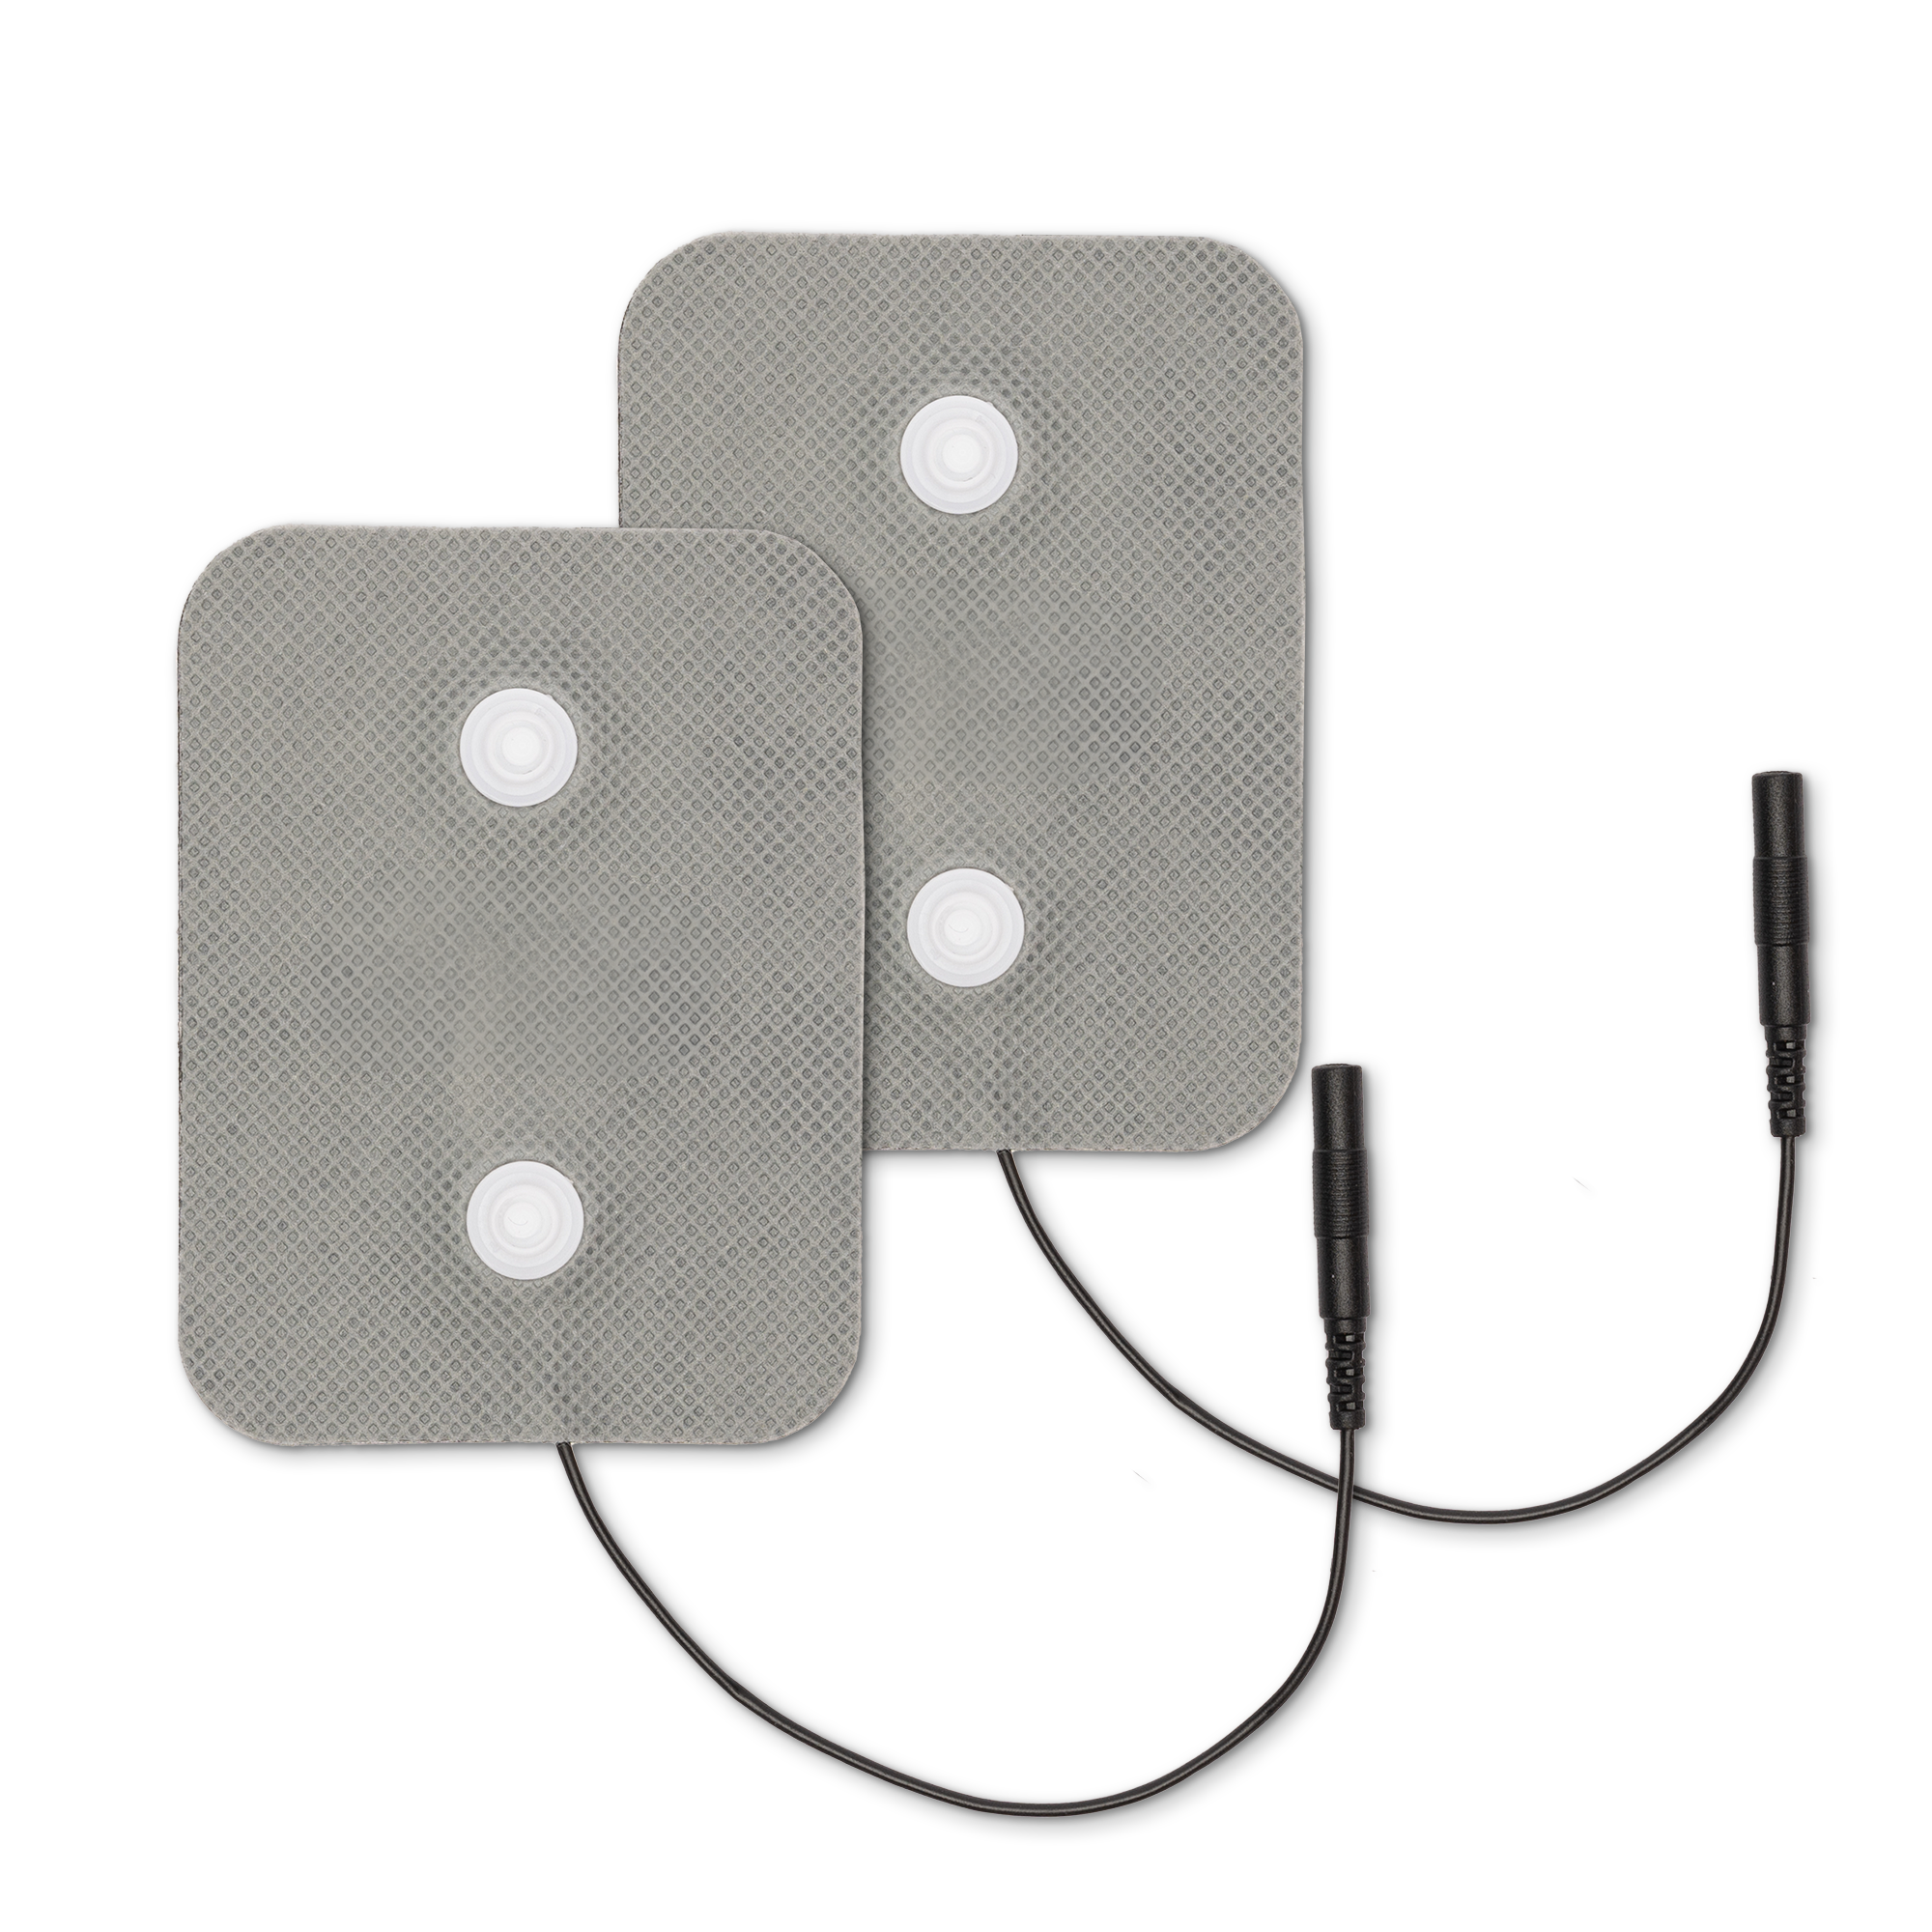 Therapy & Support Band Replacement Pads (One Set)